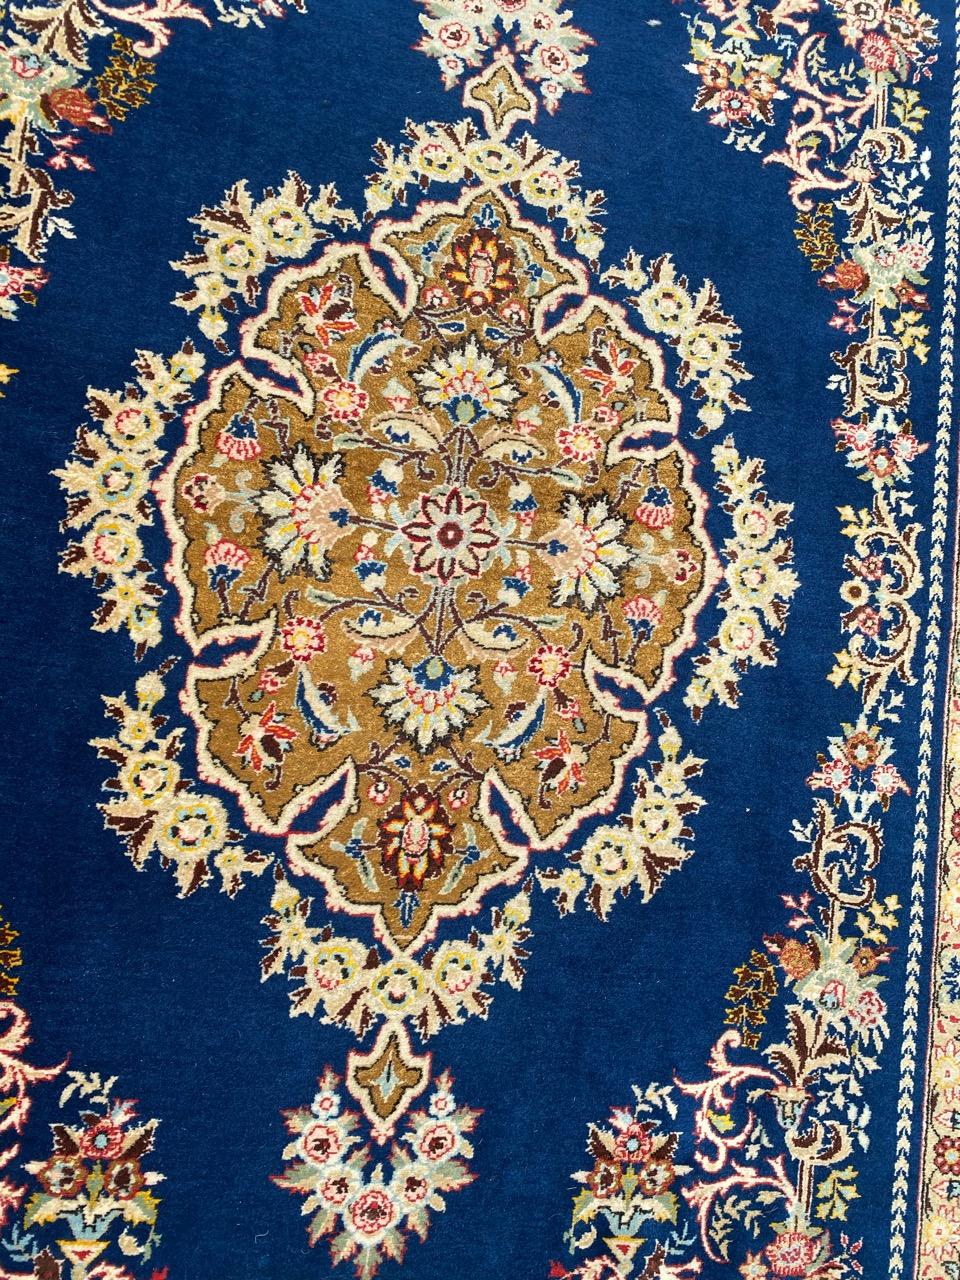 Very beautiful vintage rug with beautiful floral design and nice colors, entirely and finely hand knotted with wool and silk velvet on cotton foundation.

✨✨✨
